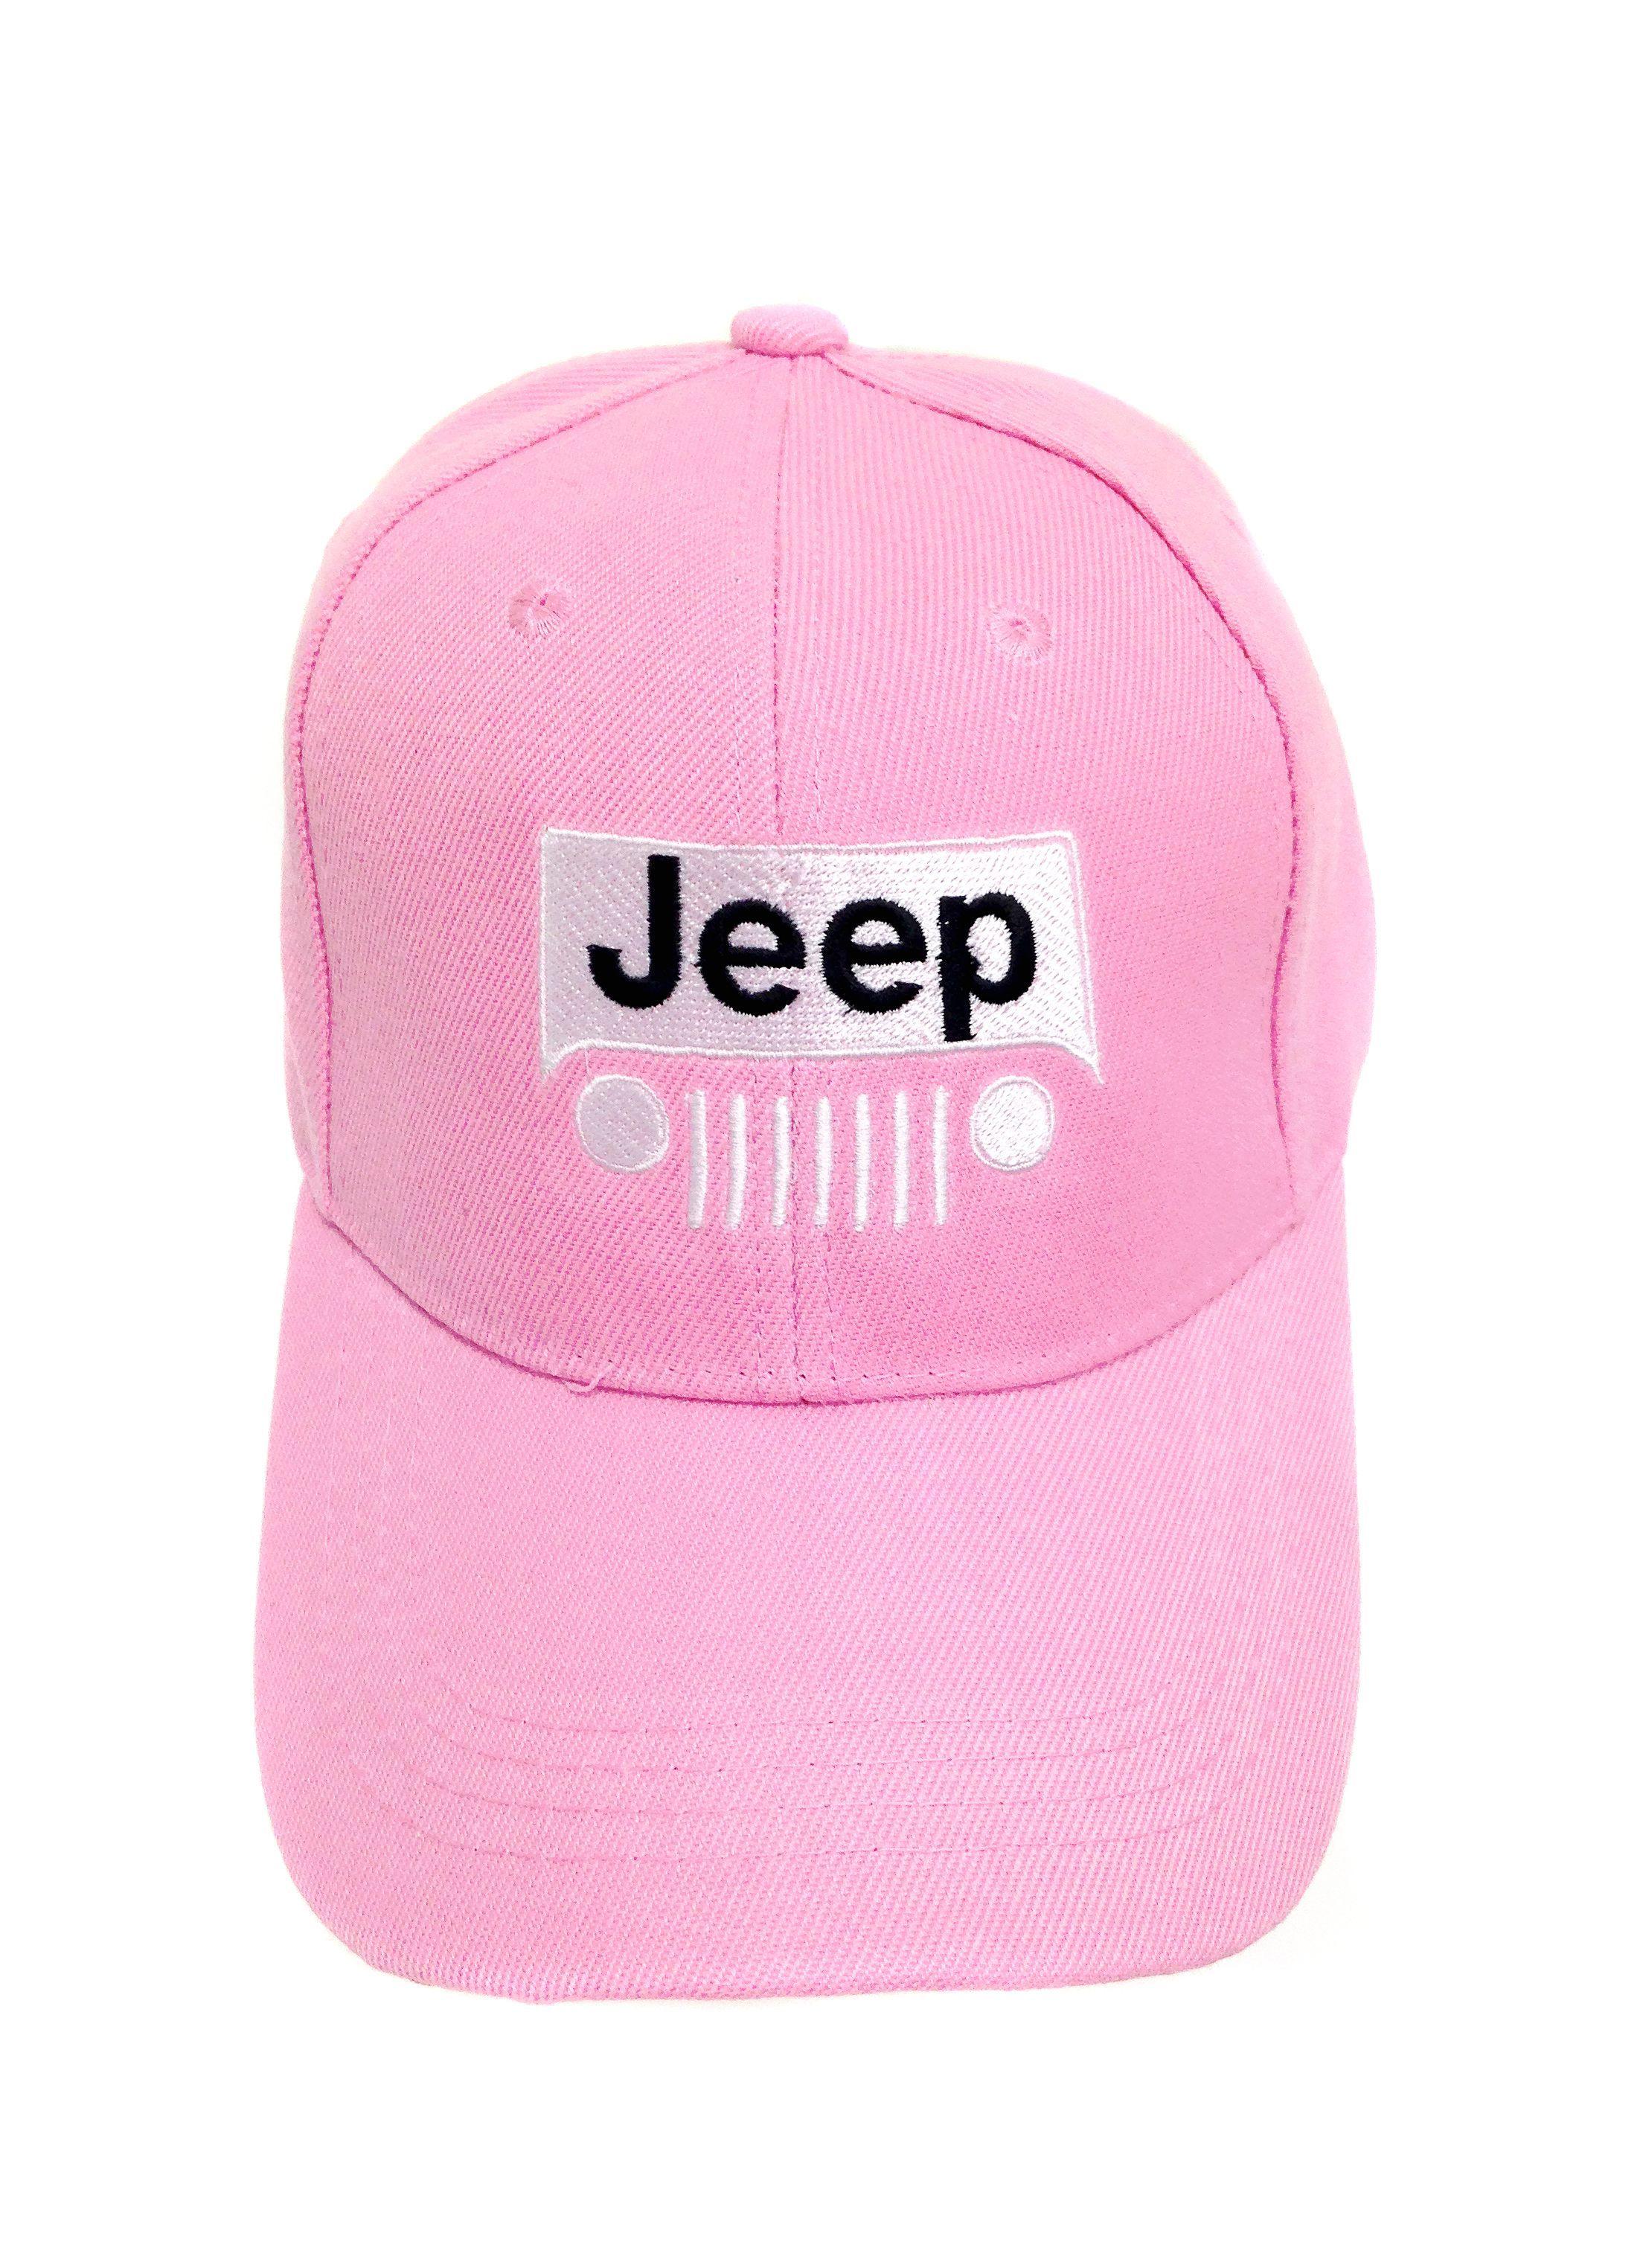 Jeep Grille Hat Logo - Women's Pink Jeep Grille Logo Cap. Accessories. Jeep, Pink jeep